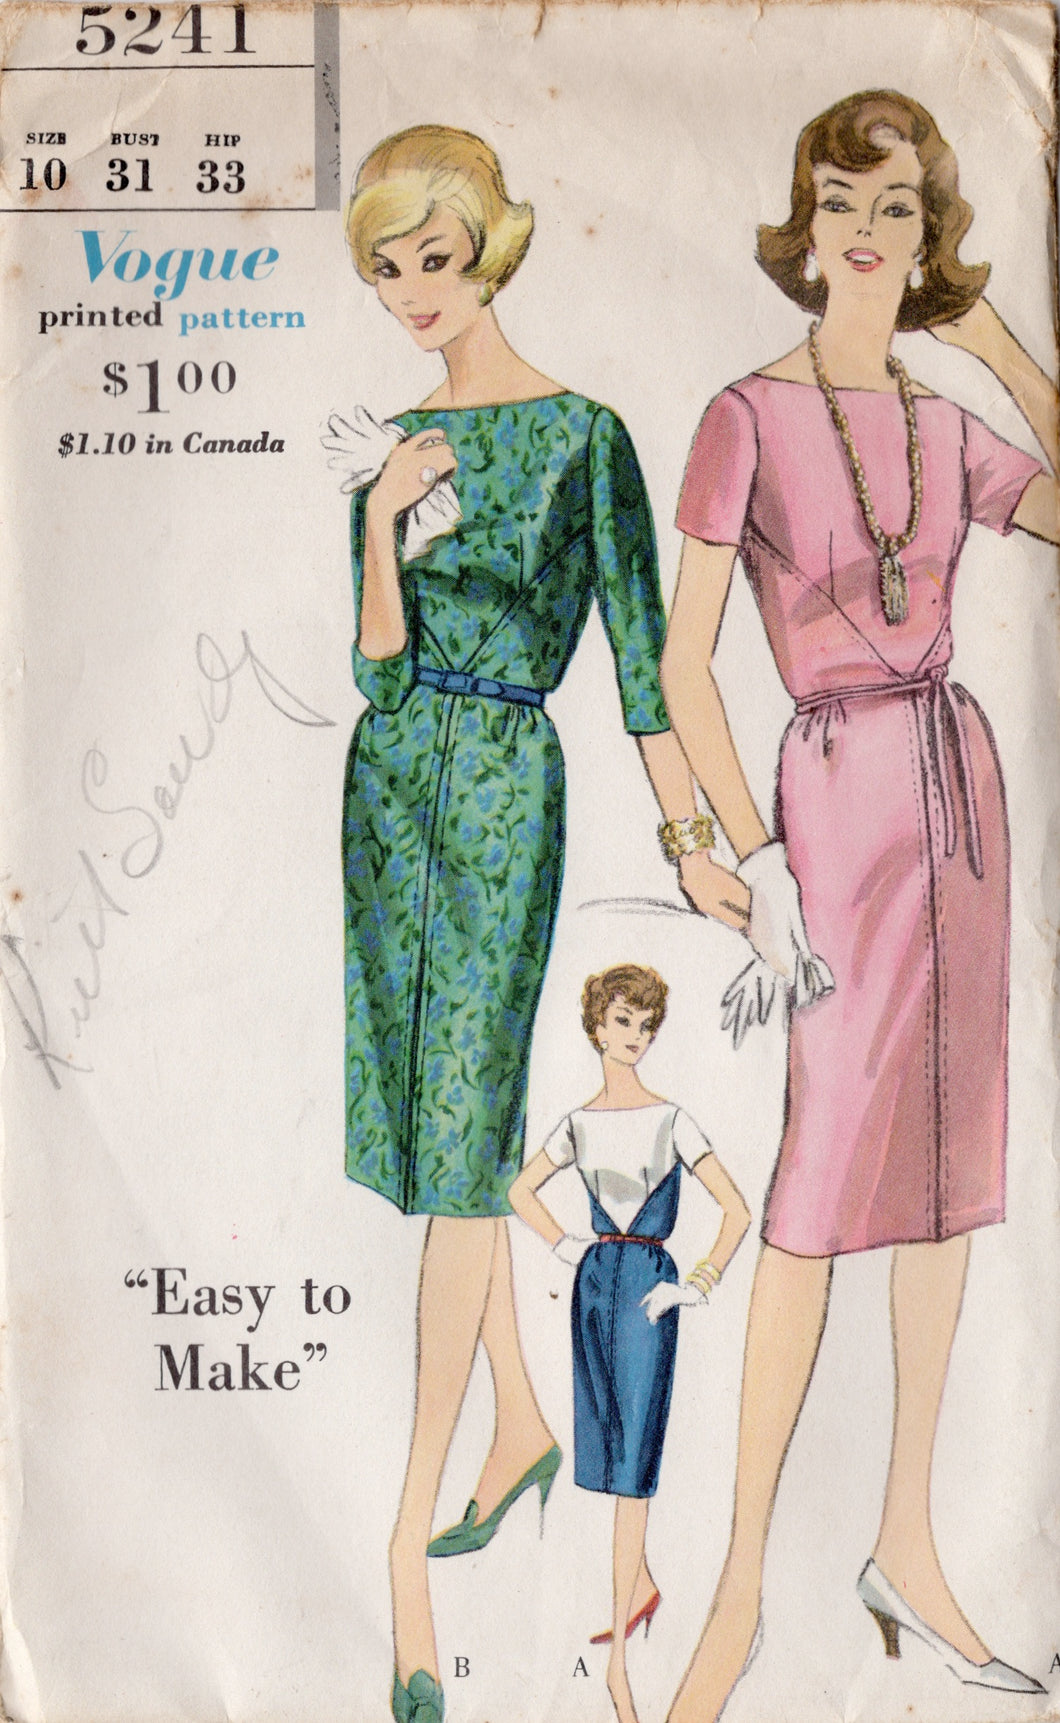 1960’s Vogue One Piece Diagonal Accent Panel Dress Pattern with Princess Line Bodice - Bust 31” - No. 5241